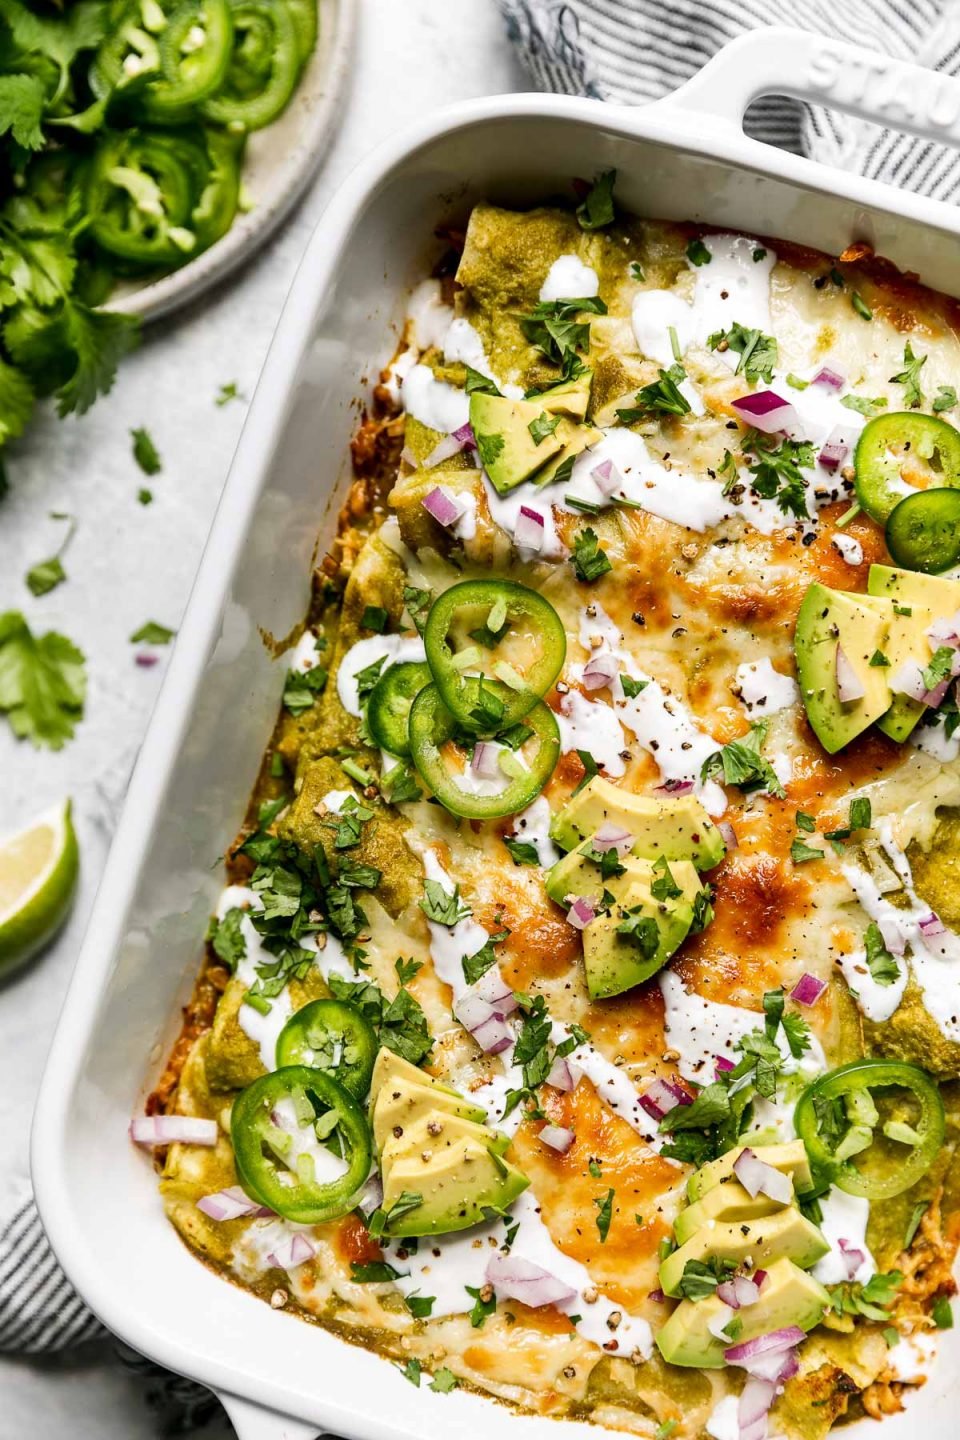 Baked green enchiladas covered in cheeese, red onion, avocado, & sliced jalapeno. The baking dish sits atop a striped gray linen napkin on a light blue surface, surrounded by cilantro leaves, & a small plate of garnishes (lime wedges, cilantro, sliced jalapeno, etc.)